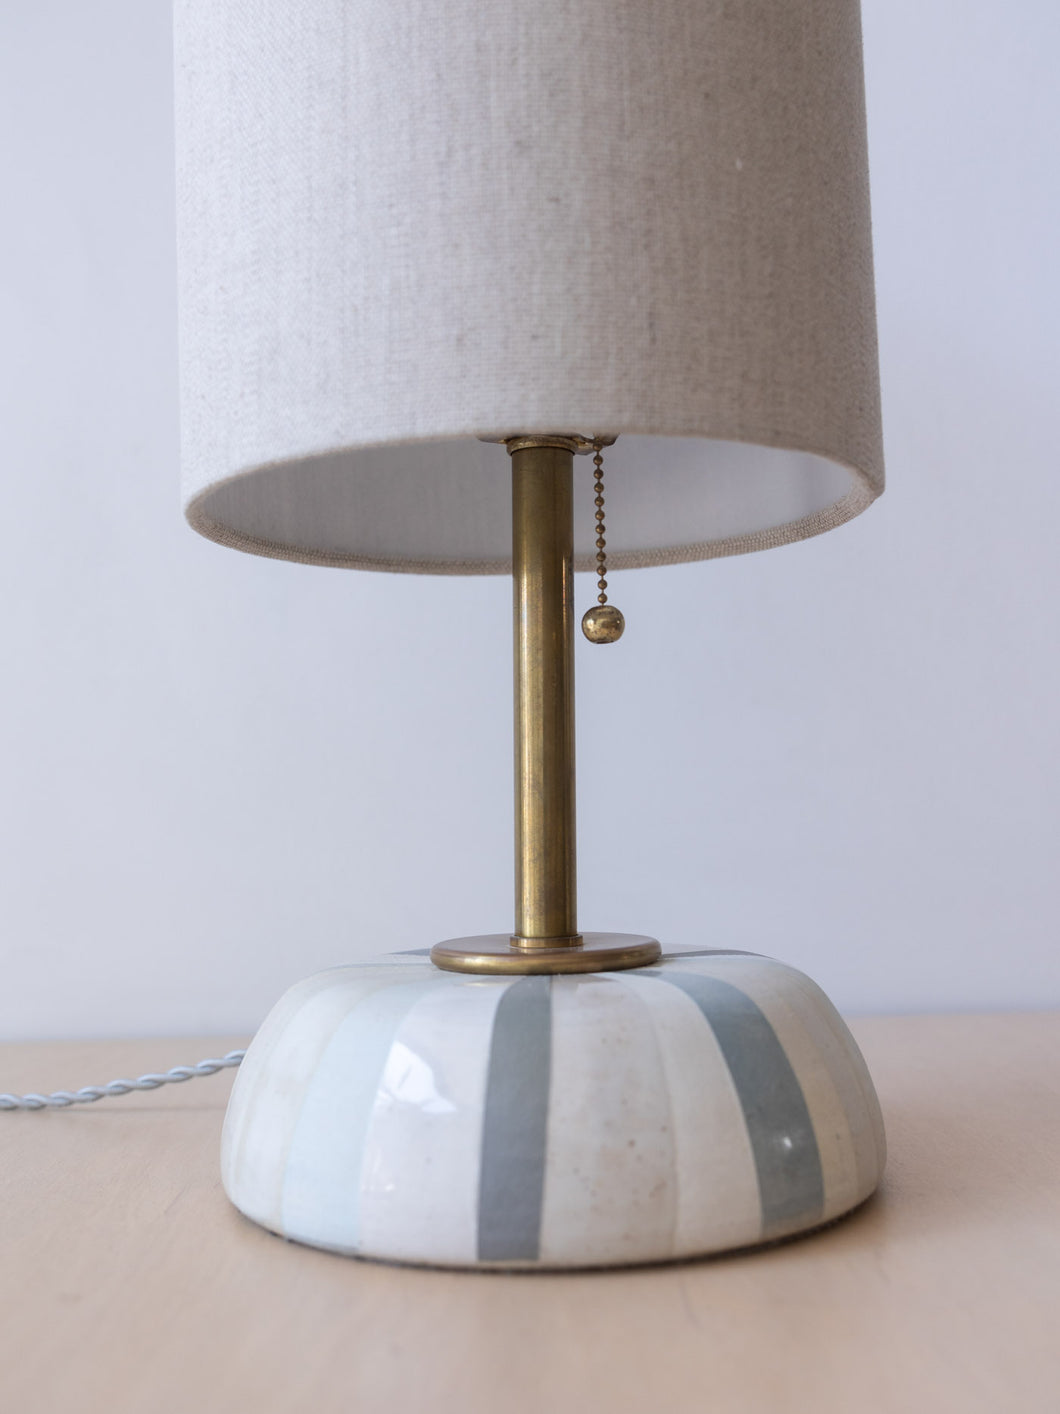 Sparo Striped Lamp with Linen Barrel Shade